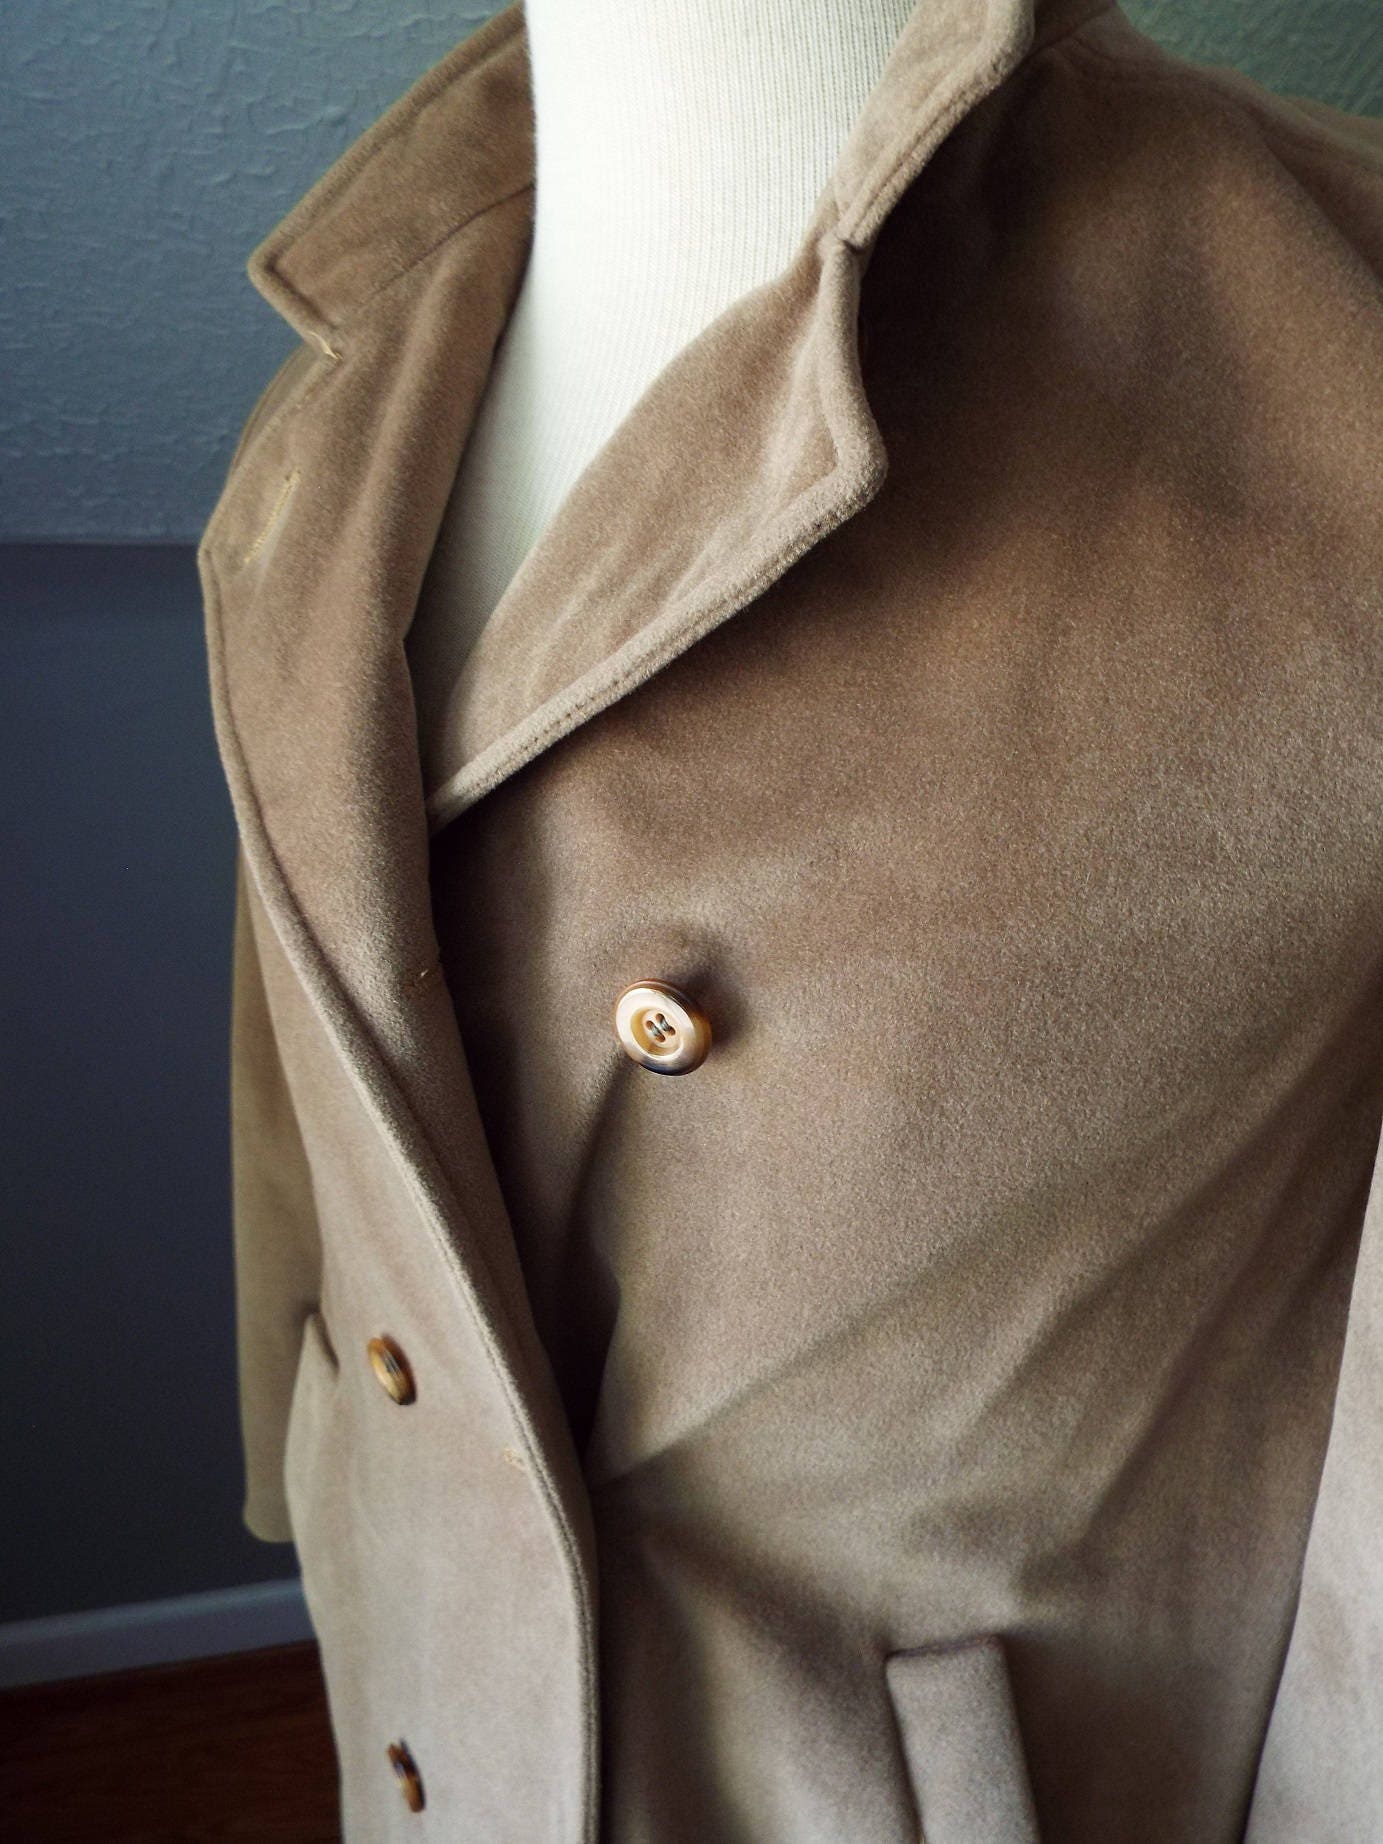 Amazing Vintage Coat for her by Lorendale